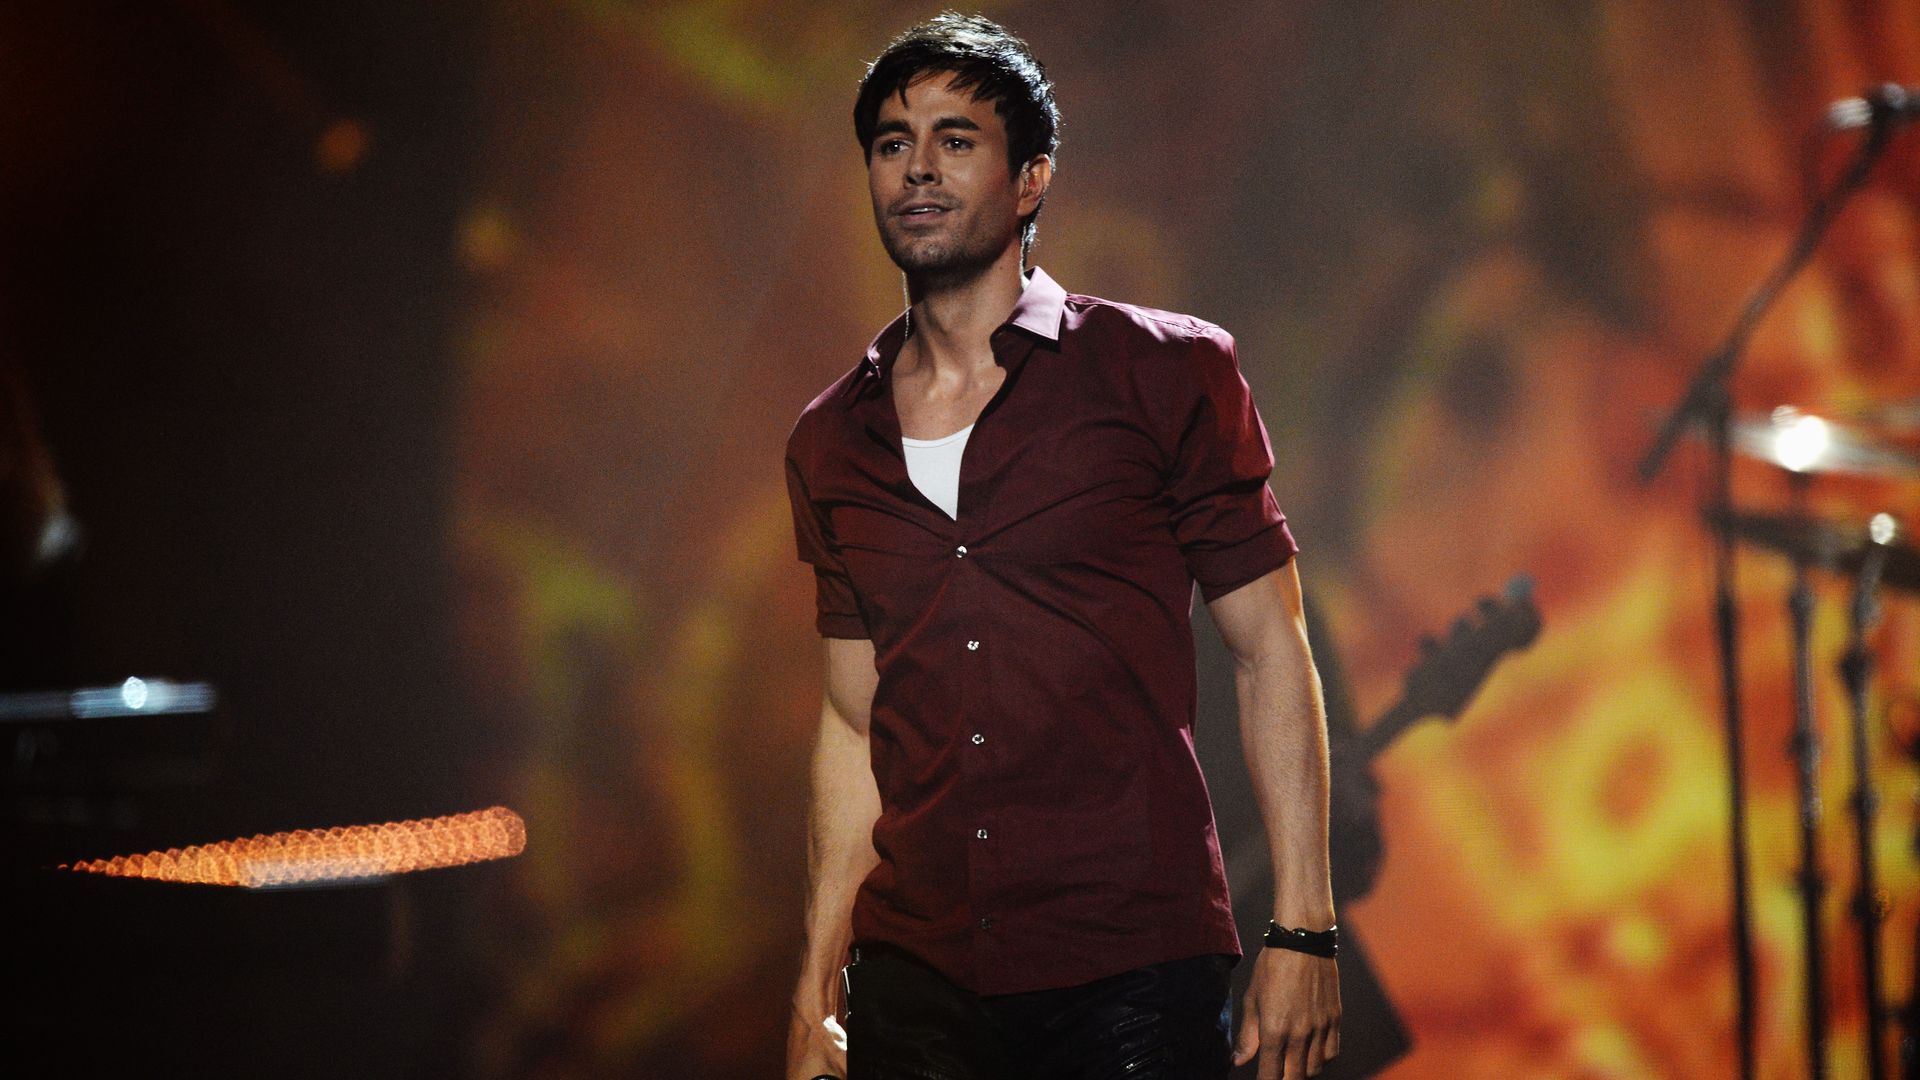 GLASGOW, SCOTLAND - NOVEMBER 09:  
Enrique Iglesias performs on stage during the MTV EMA's 2014 at The Hydro on November 9, 2014 in Glasgow, Scotland.  (Photo by Samir Hussein/Getty Images for MTV)